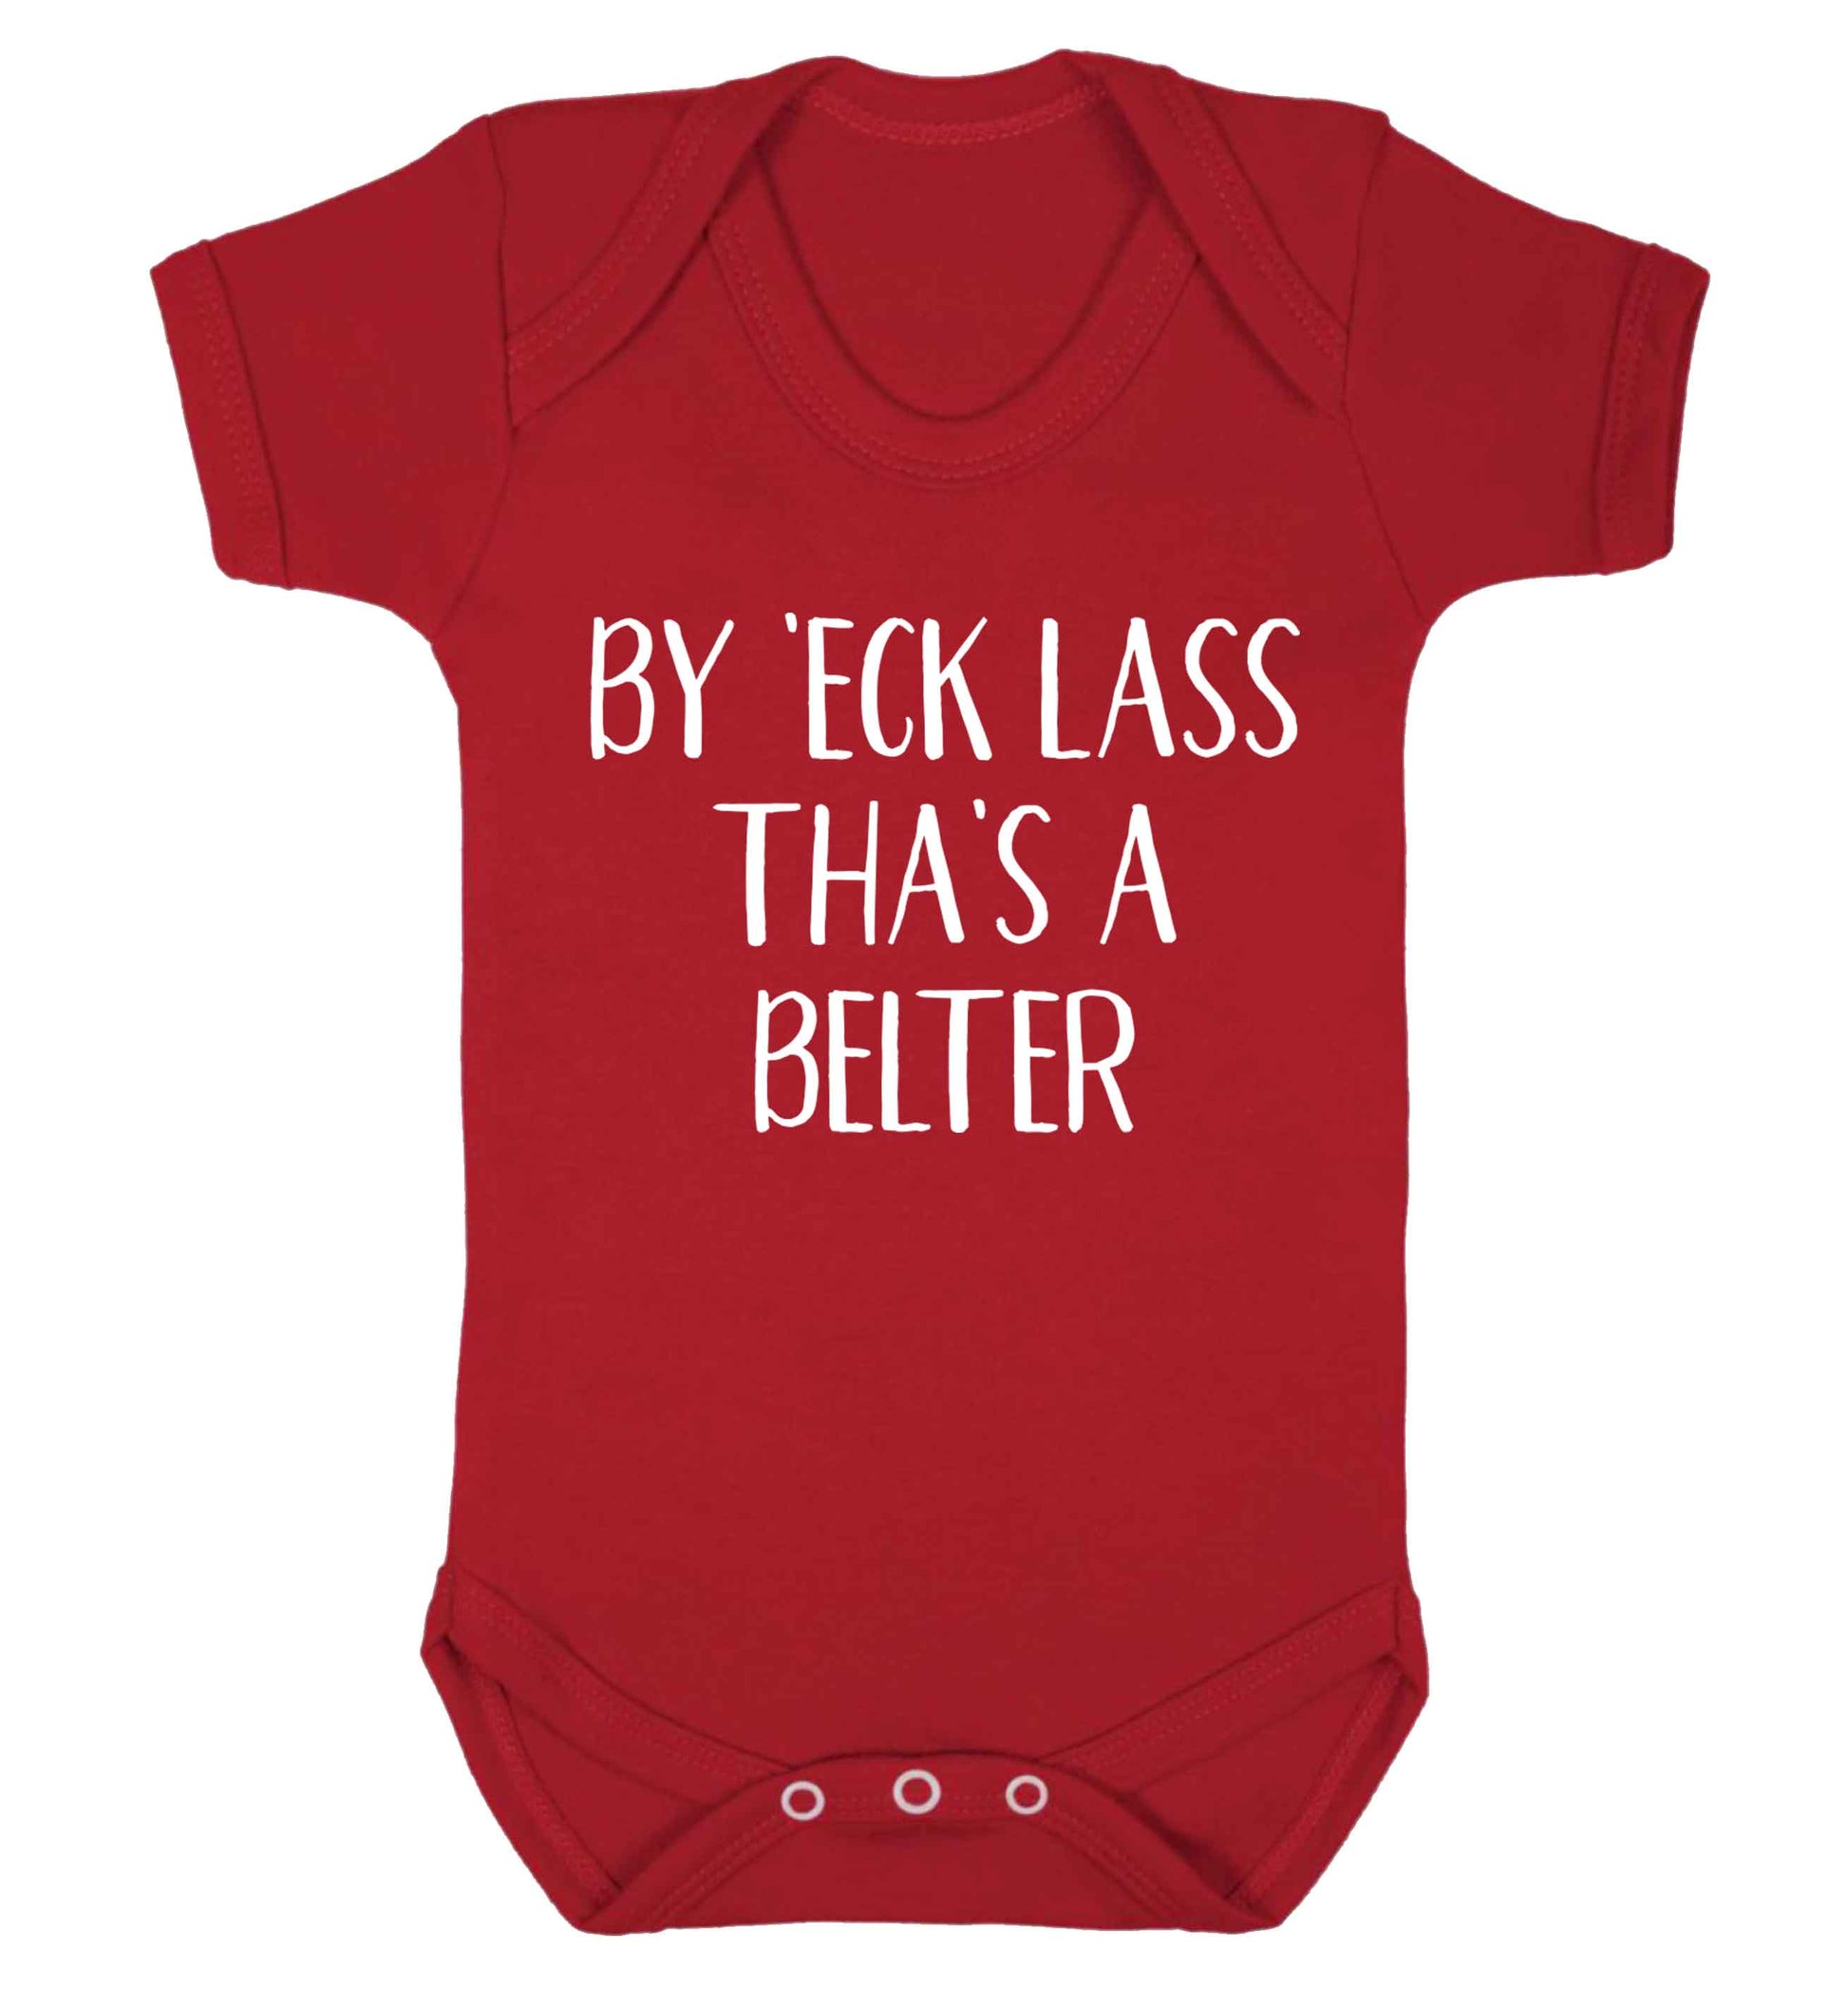 Be 'eck lass tha's a belter Baby Vest red 18-24 months